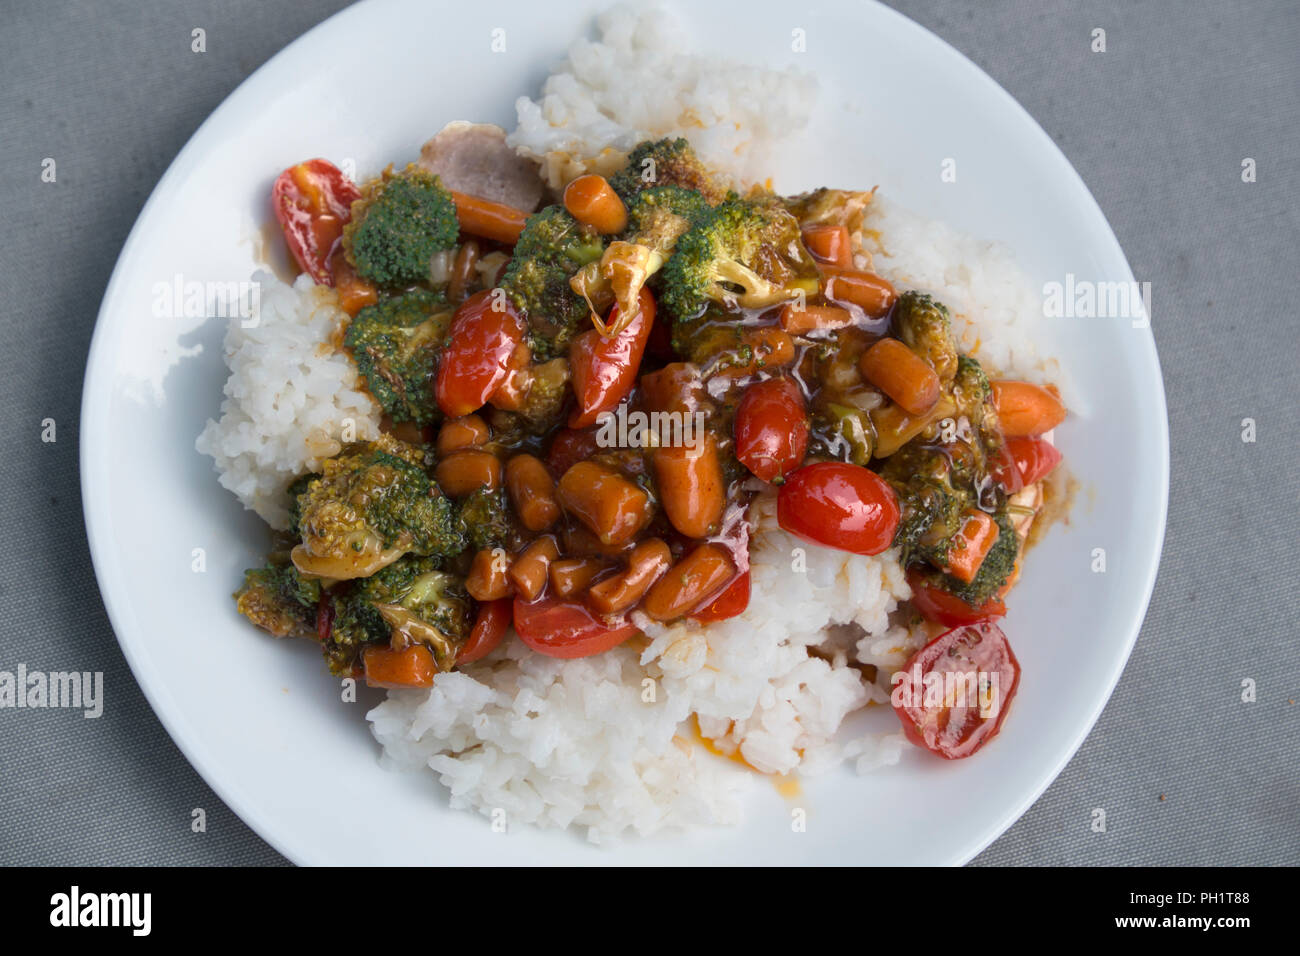 Vegetable stir fry with broccoli, carrots and grape tomatoes served on white, long-grain rice. Stock Photo